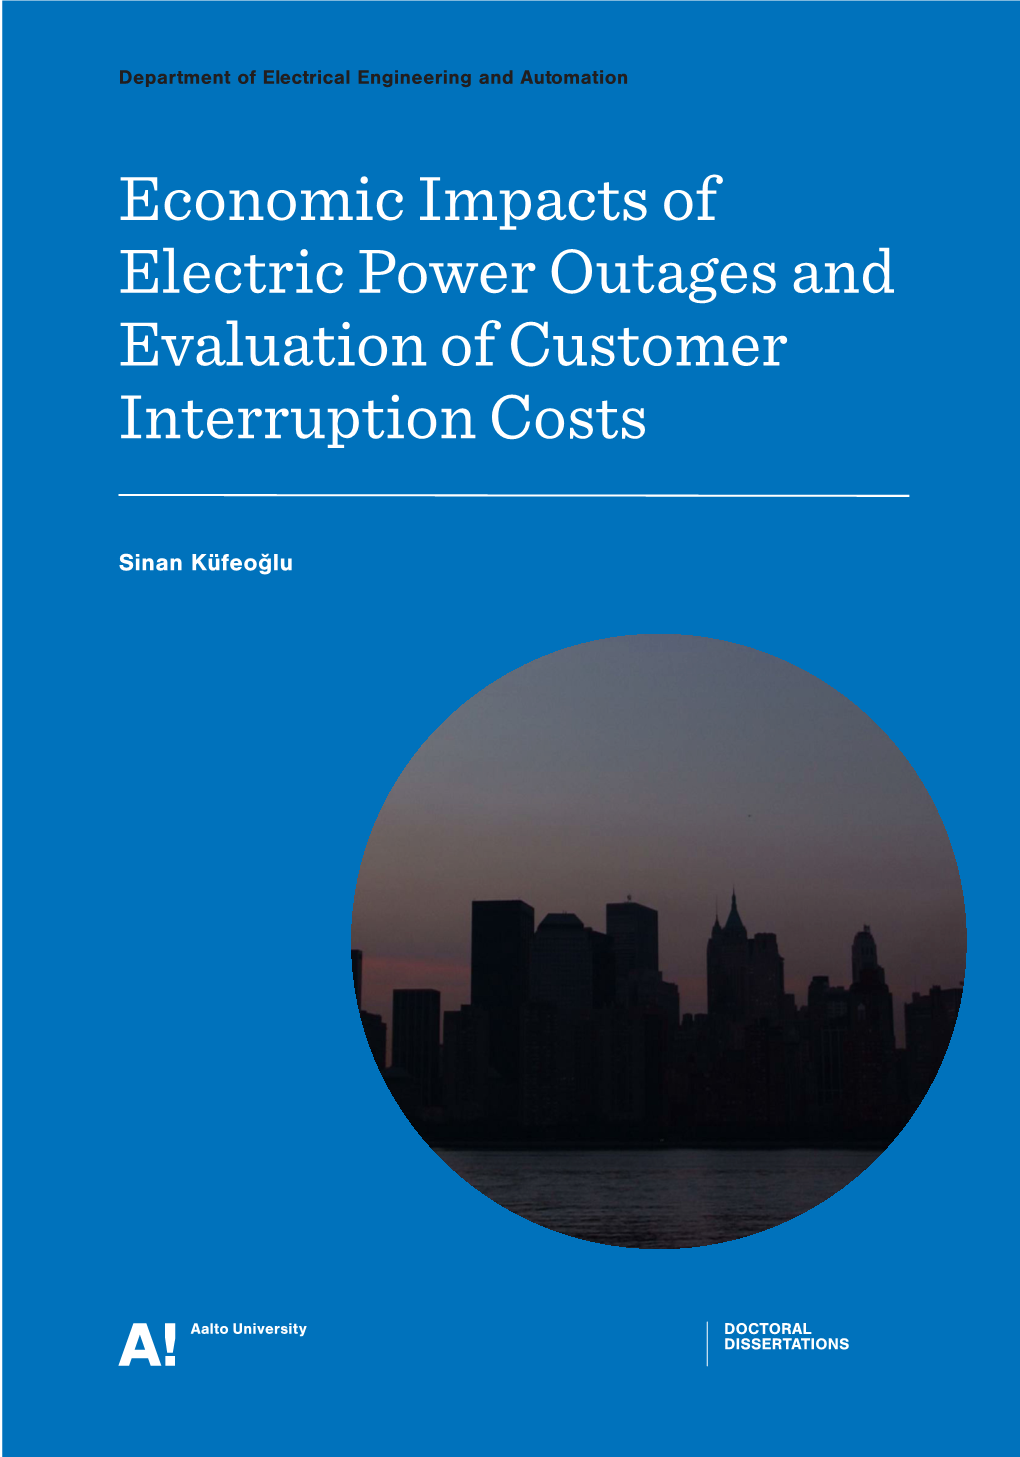 Economic Impacts of Electric Power Outages and Evaluation of Customer Interruption Costs Aalto University 2015 2015